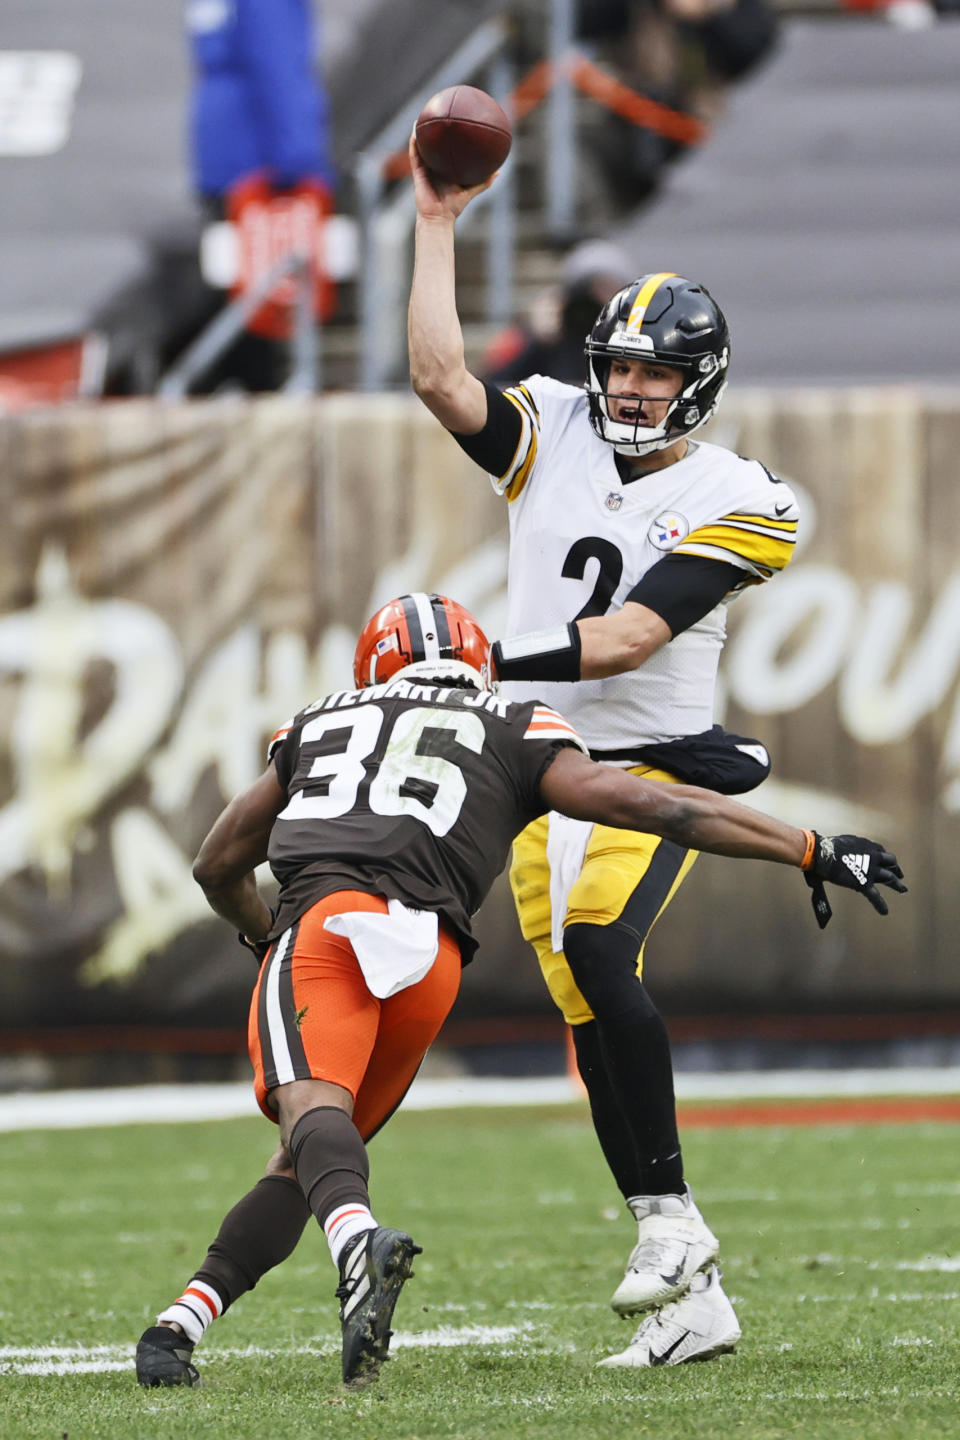 Cleveland Browns cornerback M.J.Stewart Jr. (36) rushes Pittsburgh Steelers quarterback Mason Rudolph (2) during the first half of an NFL football game, Sunday, Jan. 3, 2021, in Cleveland. (AP Photo/Ron Schwane)